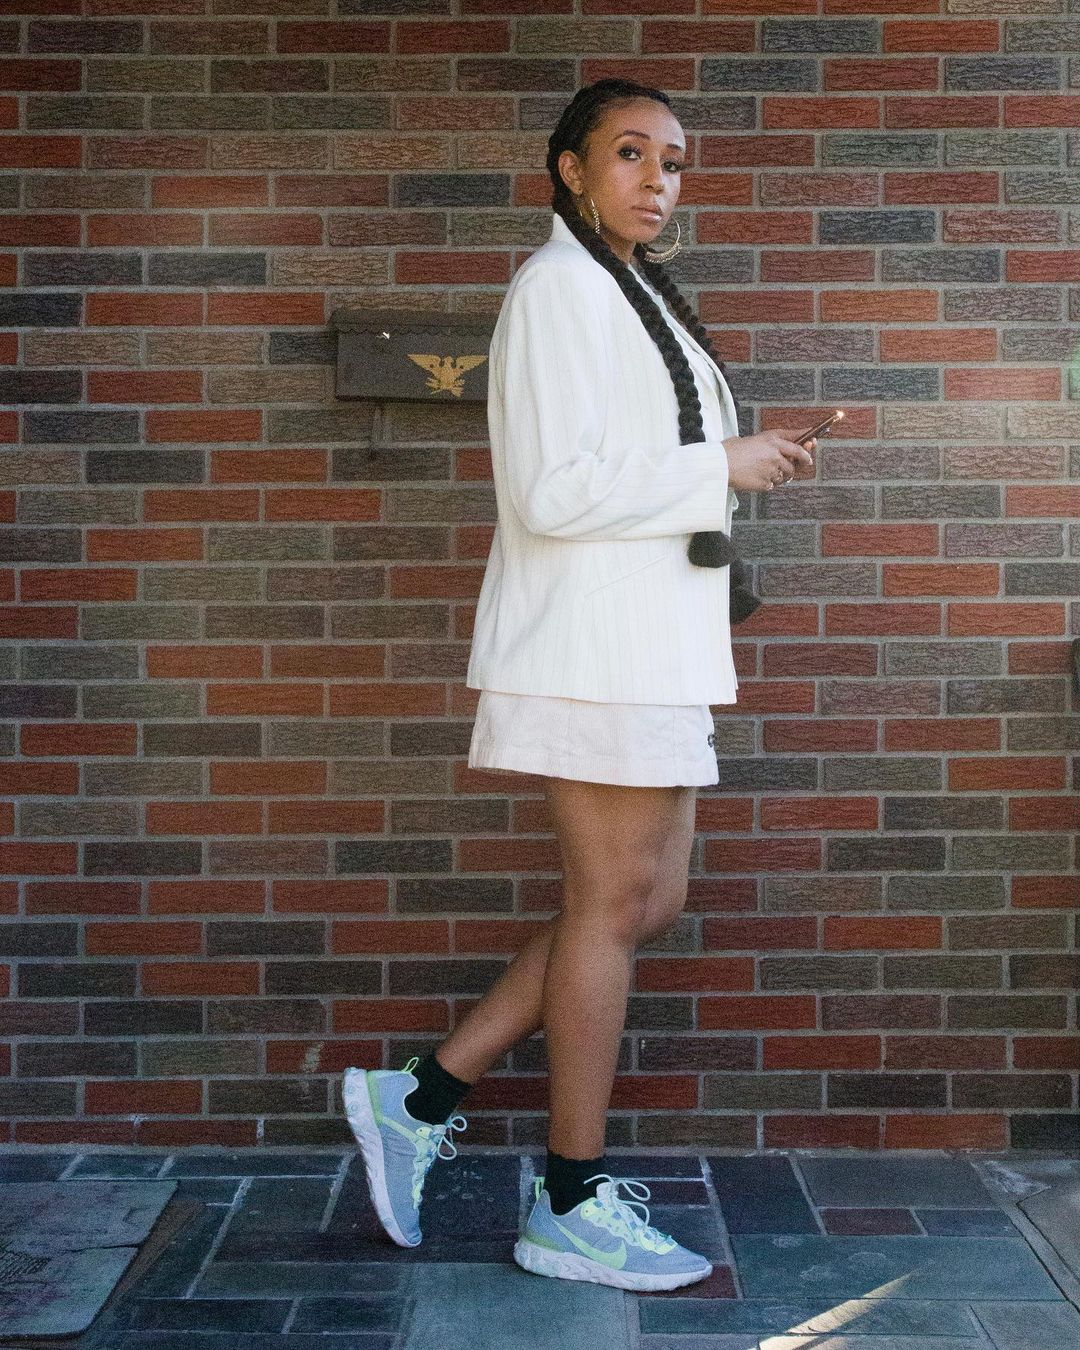 Black Girl Sneaker Influencers To Feed Your Kick Fetish